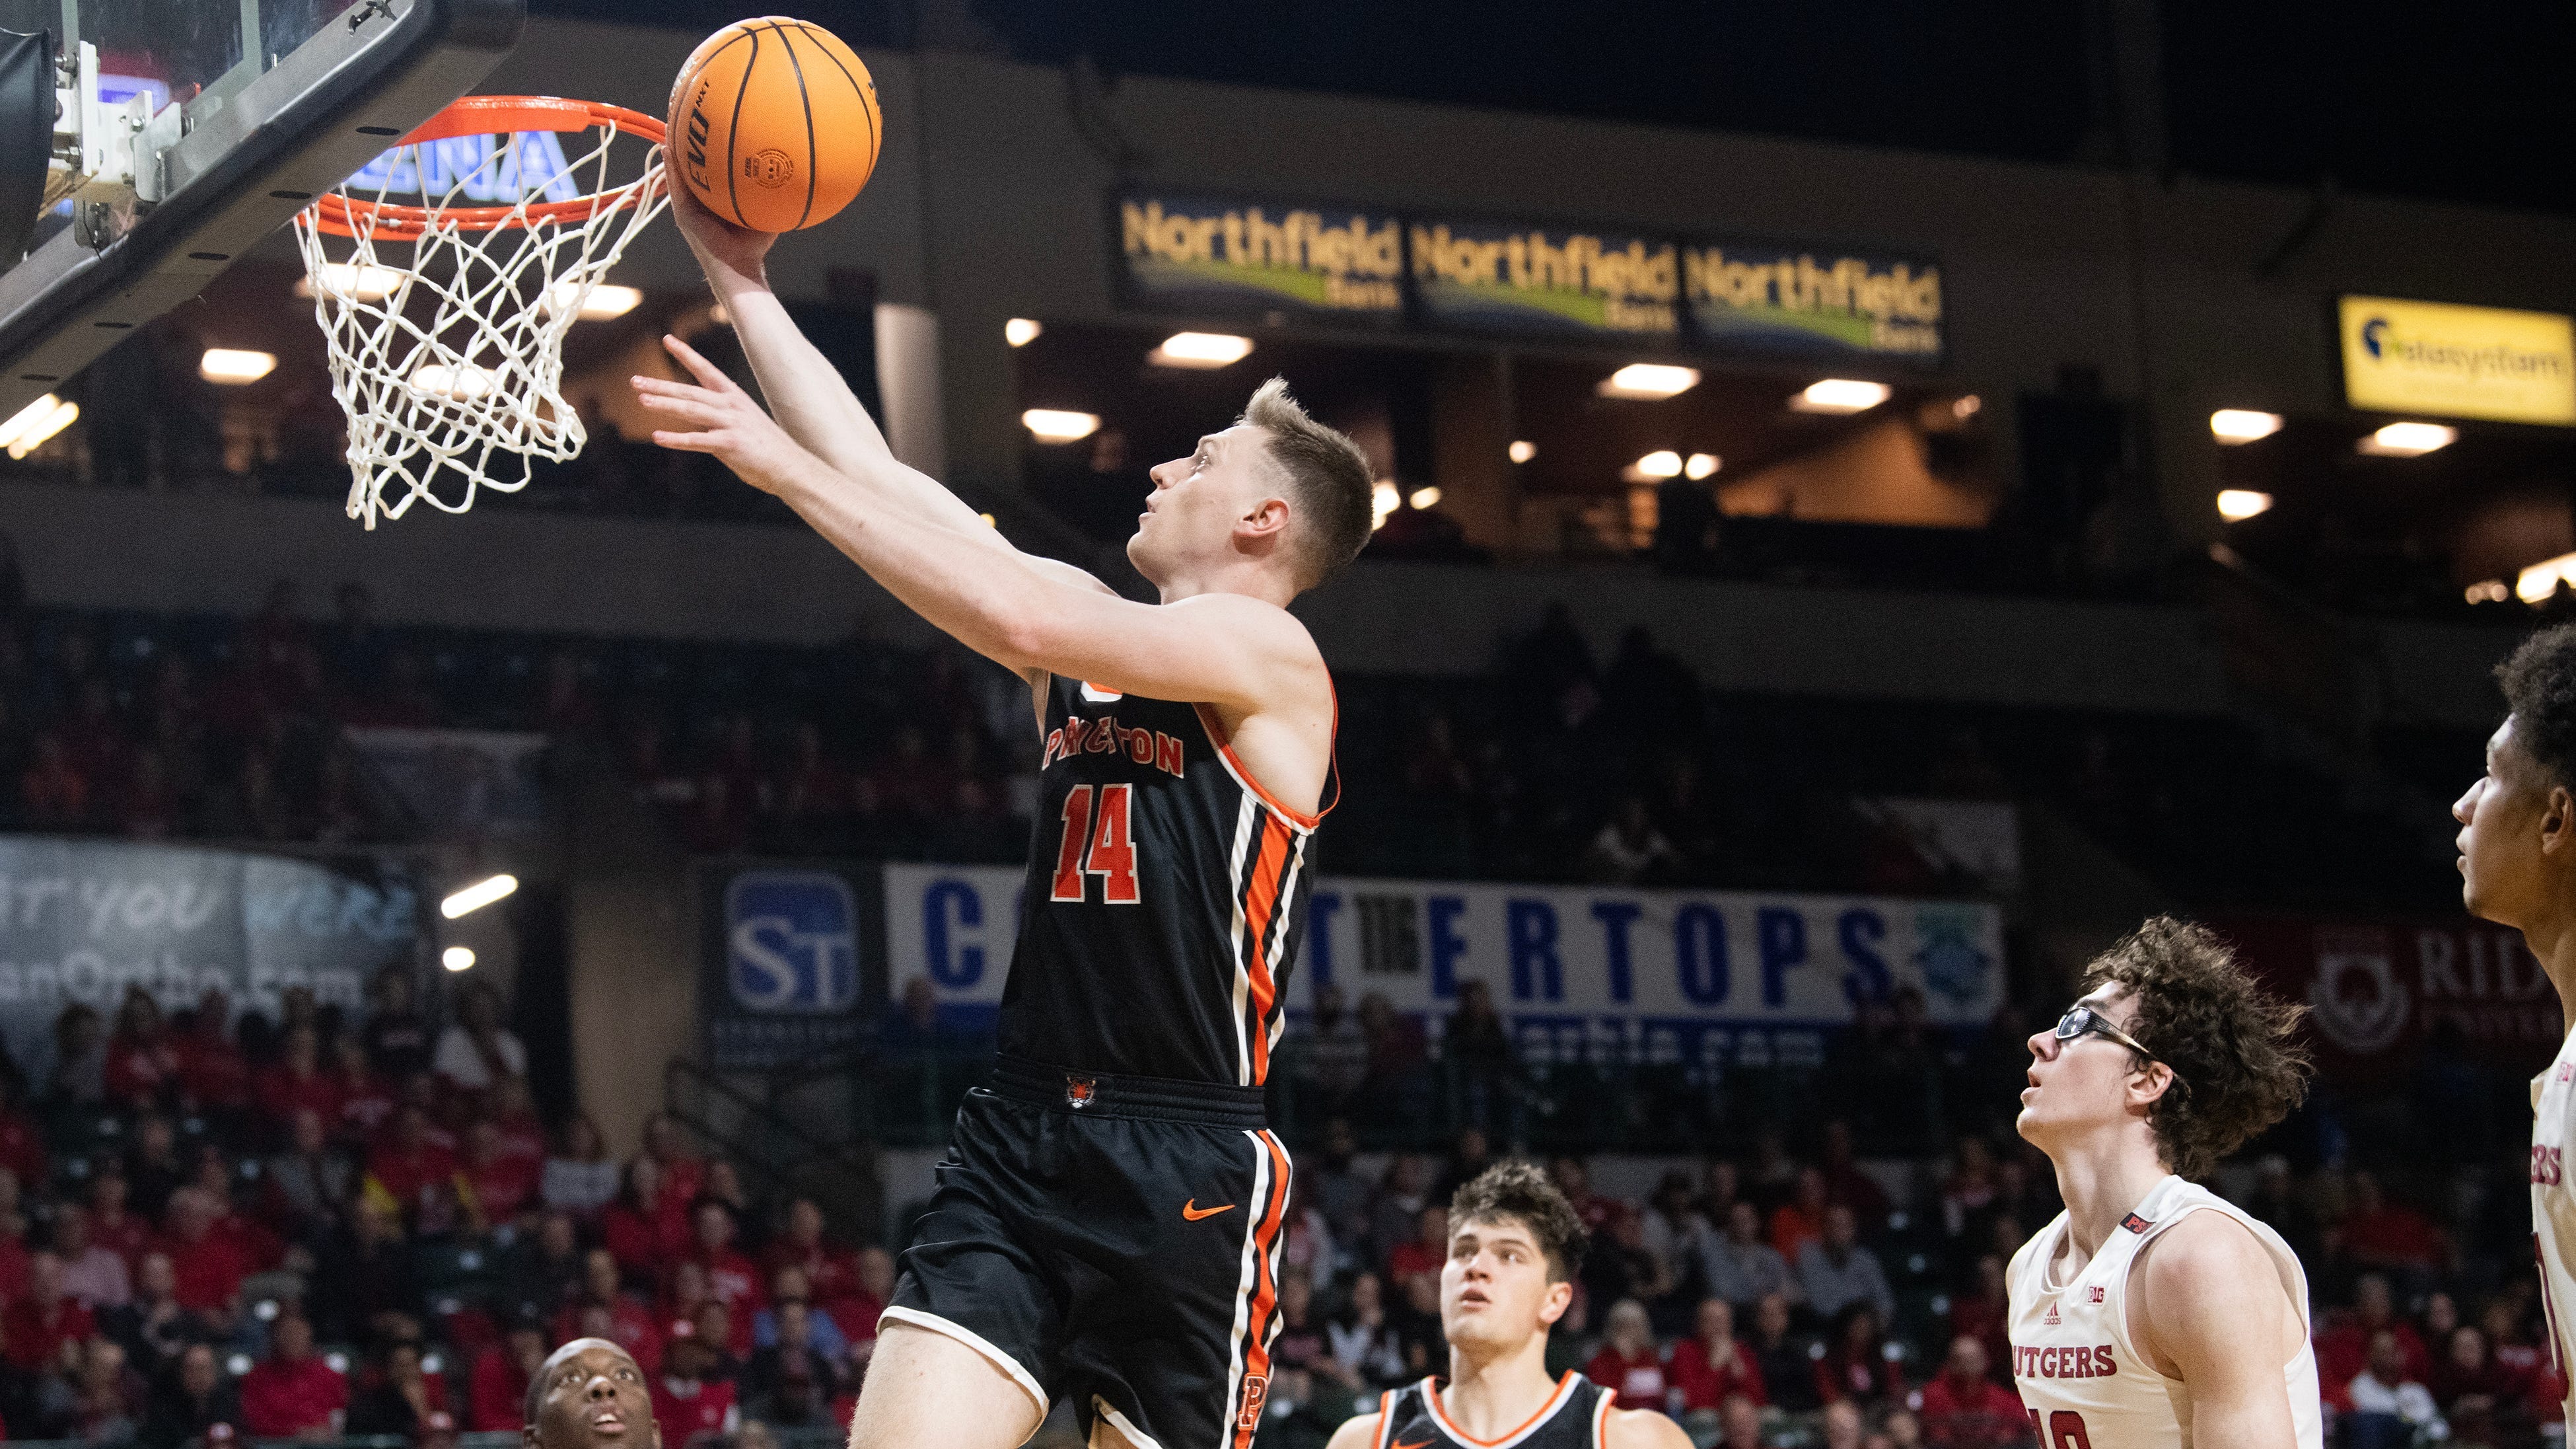 Princeton's Matt Allocco puts up a shot during the college men's basketball game between Princeton and Rutgers played at the Cure Insurance Arena in Trenton on Monday, November 6, 2023.